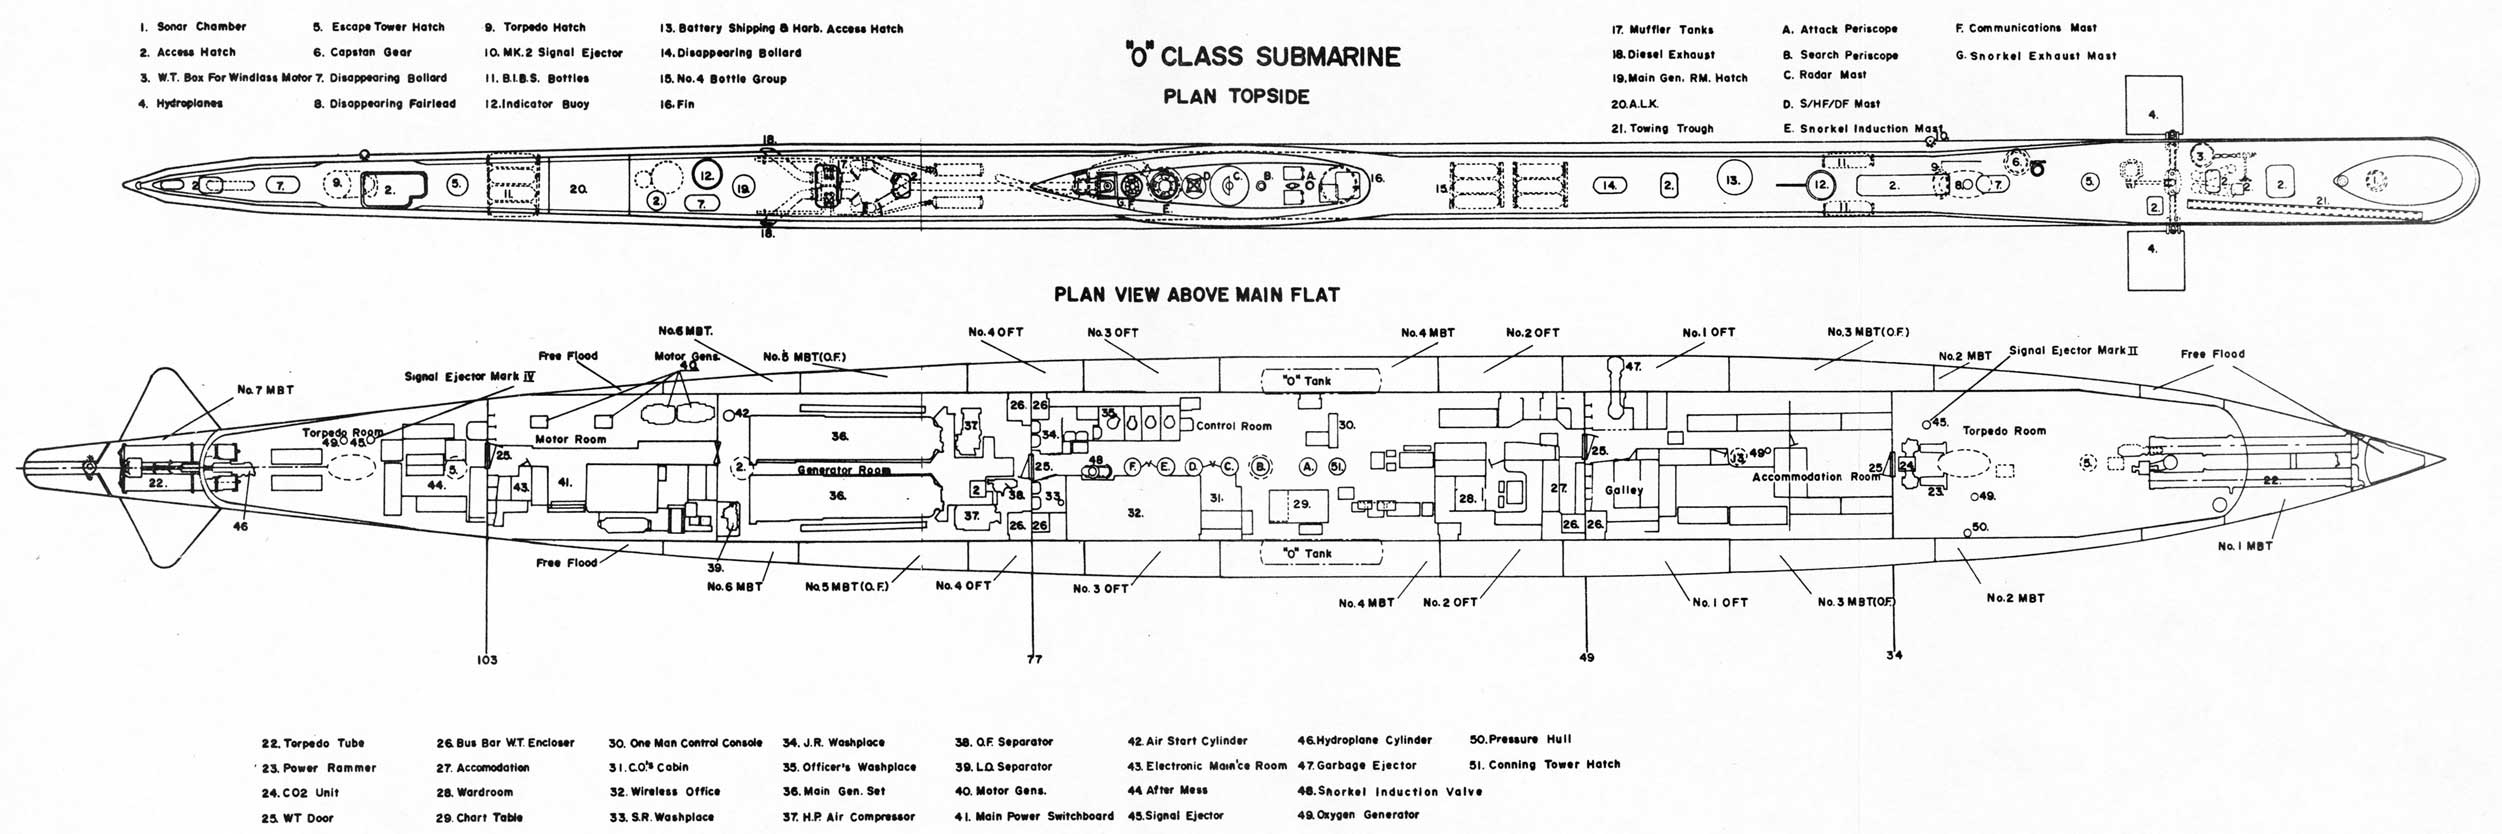 O Class Submarine
PLAN TOPSIDE

1. Sonar Chamber
2. Access Hatch
3. W.T. Box For Windlass Motor
4. Hydroplanes

5. Escape Tower Hatch
6. Capstan Gear
7. Disappearing Bollard
8. Disappearing Fairlead

9. Torpedo Hatch
10. MK. 2 Signal Ejector
11. B.I.B.S. Bottles
12. Indicator Buoy

13. Battery Shipping and Access Hatch
14. Disappearing Bollard
15. No. 4. Bottle Group
16. Fin

17. Muffler Tanks
18. Diesel Exhaust
19. Main Gen. RM. Hatch
20. A.L.K.
21. Towing Trough

A. Attack Periscope
B. Search Periscope
C. Radar Mast
D. S-HF-DF Mast
E. Snorkel Induction Mast

F. Communications Mast
G. Snorkel Exhaust Mast

Plan View Above Main Flat

22. Torpedo Tube
23. Power Rammer
24. CO2 Unit
25. WT Door

26 Bus Bar WT Enclosure
27 Accommodation
28. Wardroom
29. Chart Table

30. One Man Control Console
31. C.O.s Cabin
32. Wireless Office
33. S.R. Washplace

34. J.R. Washplace
35. Officers Washplace
36. Main Gen. Set
37. H.P. Air Compressor

38. O.F. Separator
39. L.O. Separator
40. Motor Gens.
41. Main Power Switchboard

42. Air Start Cylinder
43. Electronic Main's Room
44. After Mess
45. Signal Ejector

46. Hydroplane Cylinder
47. Garbage Ejector
48. Snorkel Induction Valve
49. Oxygen Generator

50.Pressure Hull
51. Conning Tower Hatch